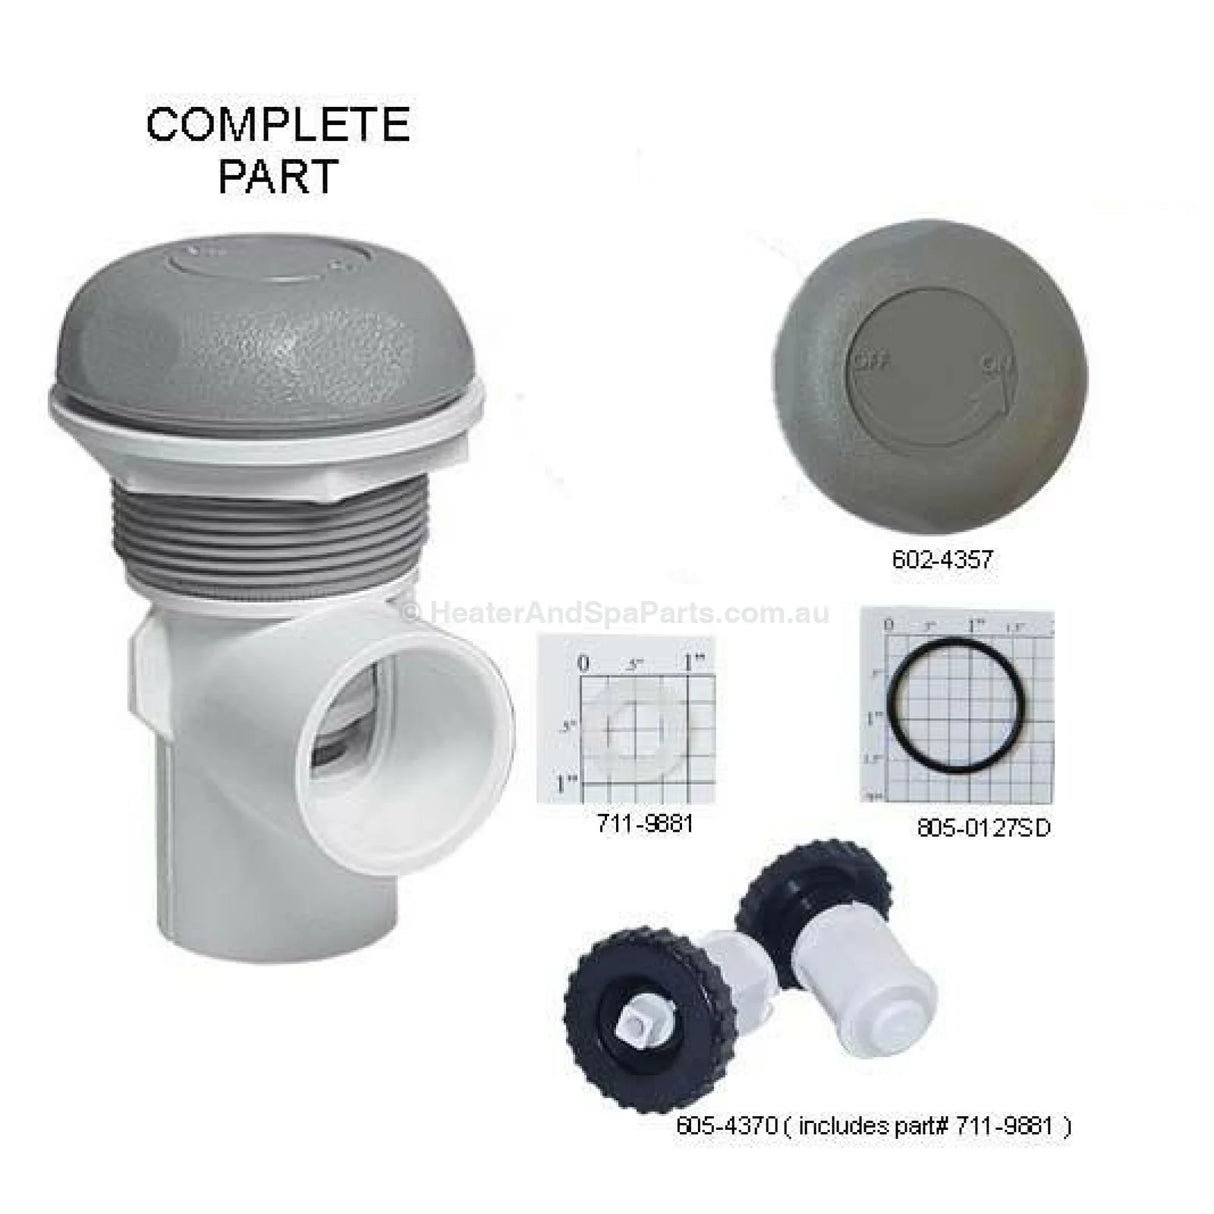 Waterway 1" / 25mm On / Off Valve - Heater and Spa Parts